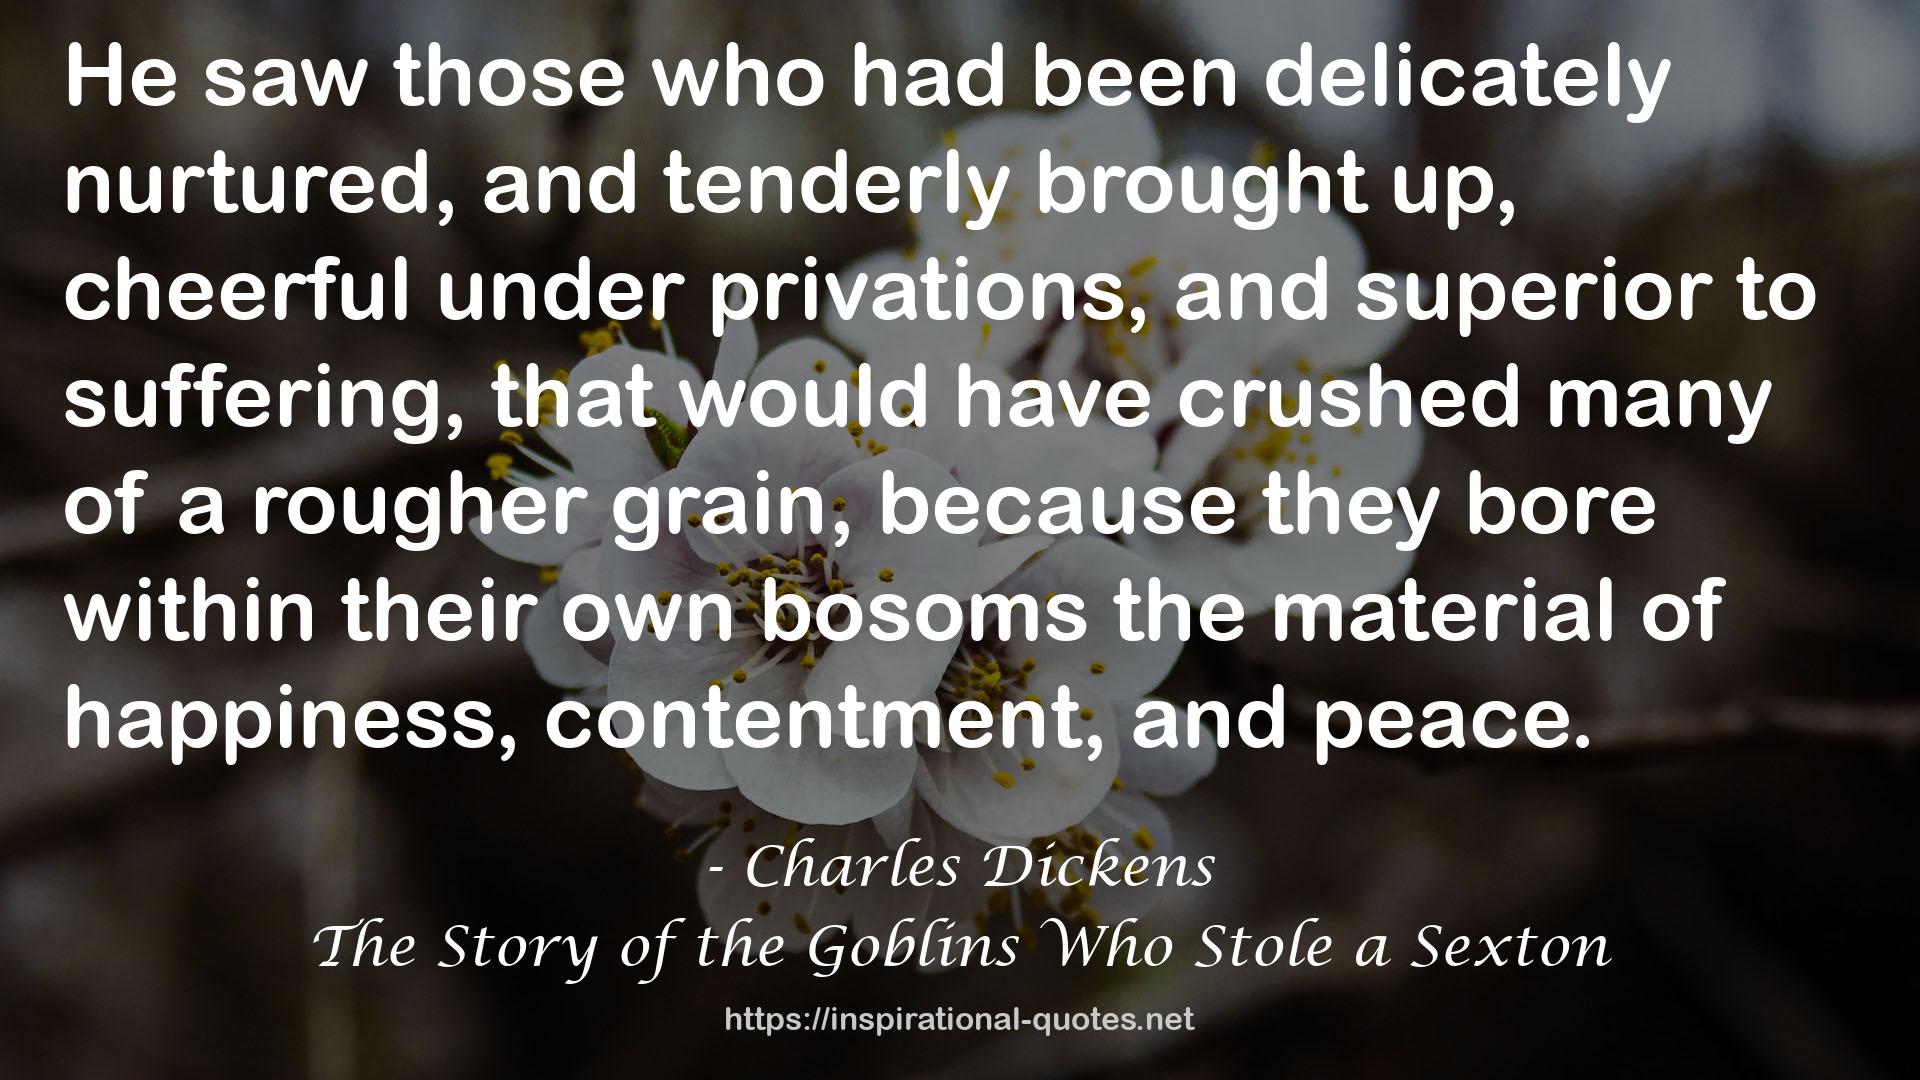 The Story of the Goblins Who Stole a Sexton QUOTES